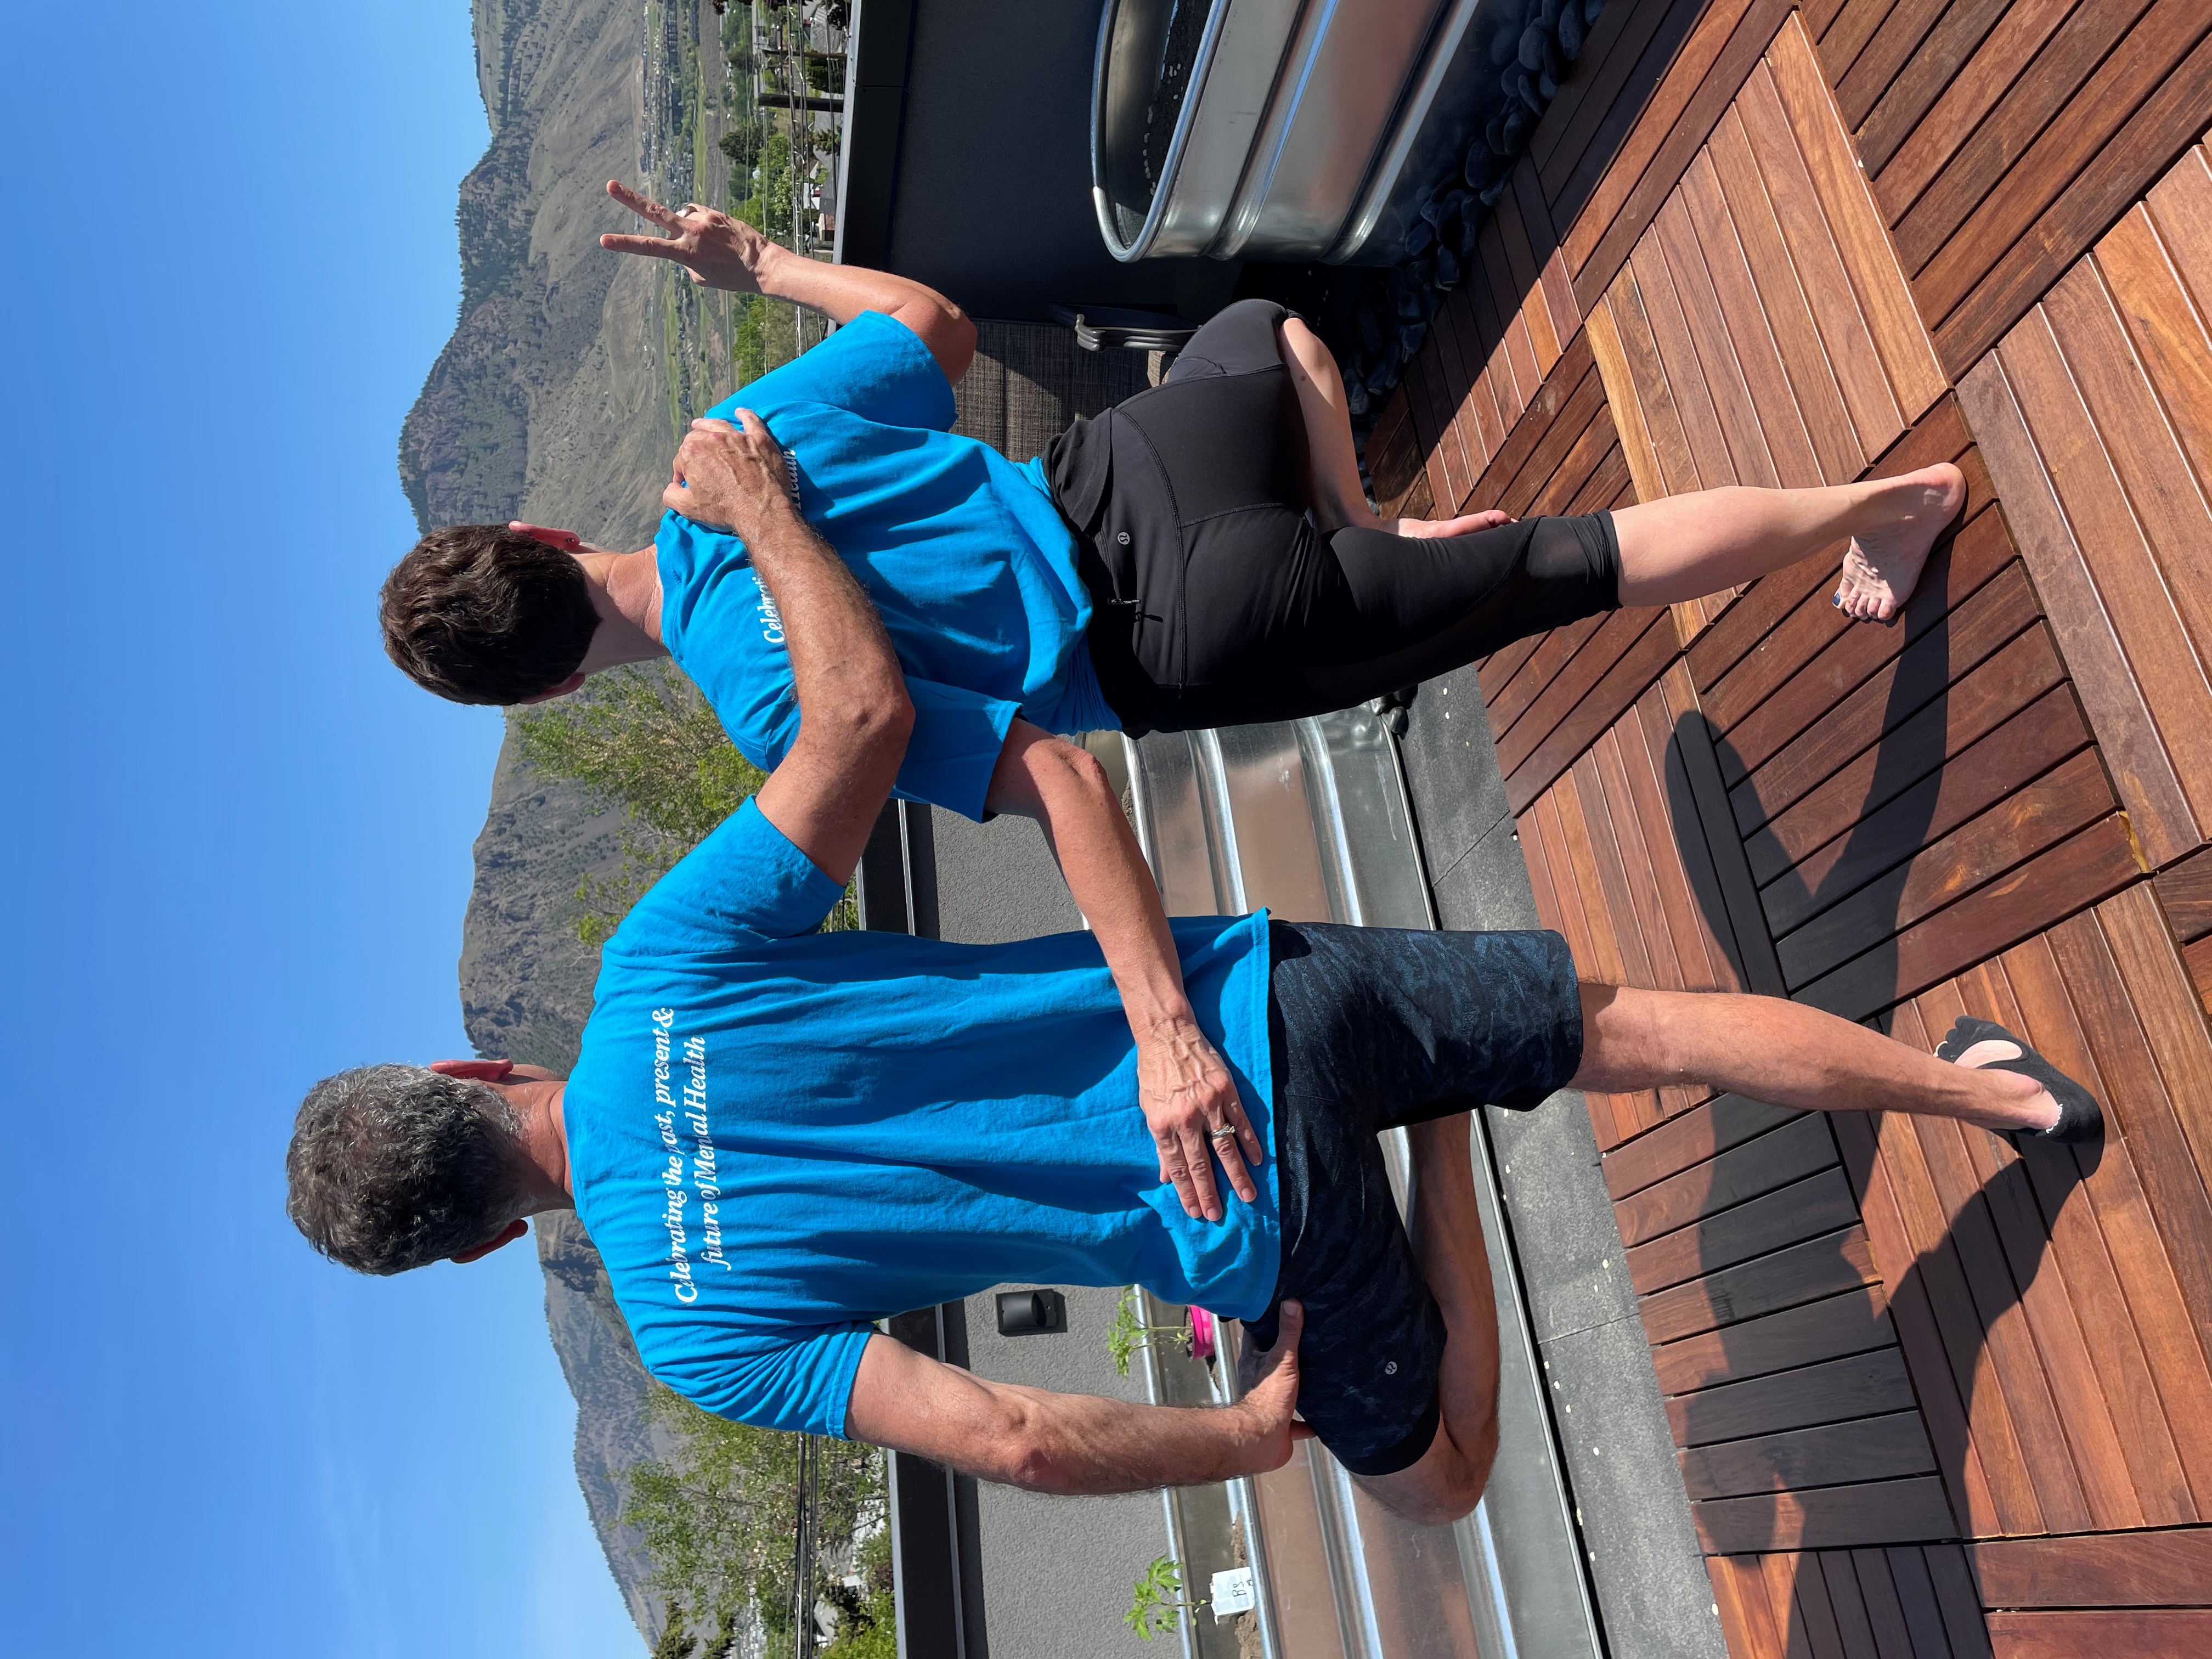 A man (left) and woman in blue shirts and yoga pants standing on one leg with the other leg at a right-angle from the standing leg, with their backs to the camera on a balcony with mountains in the background.